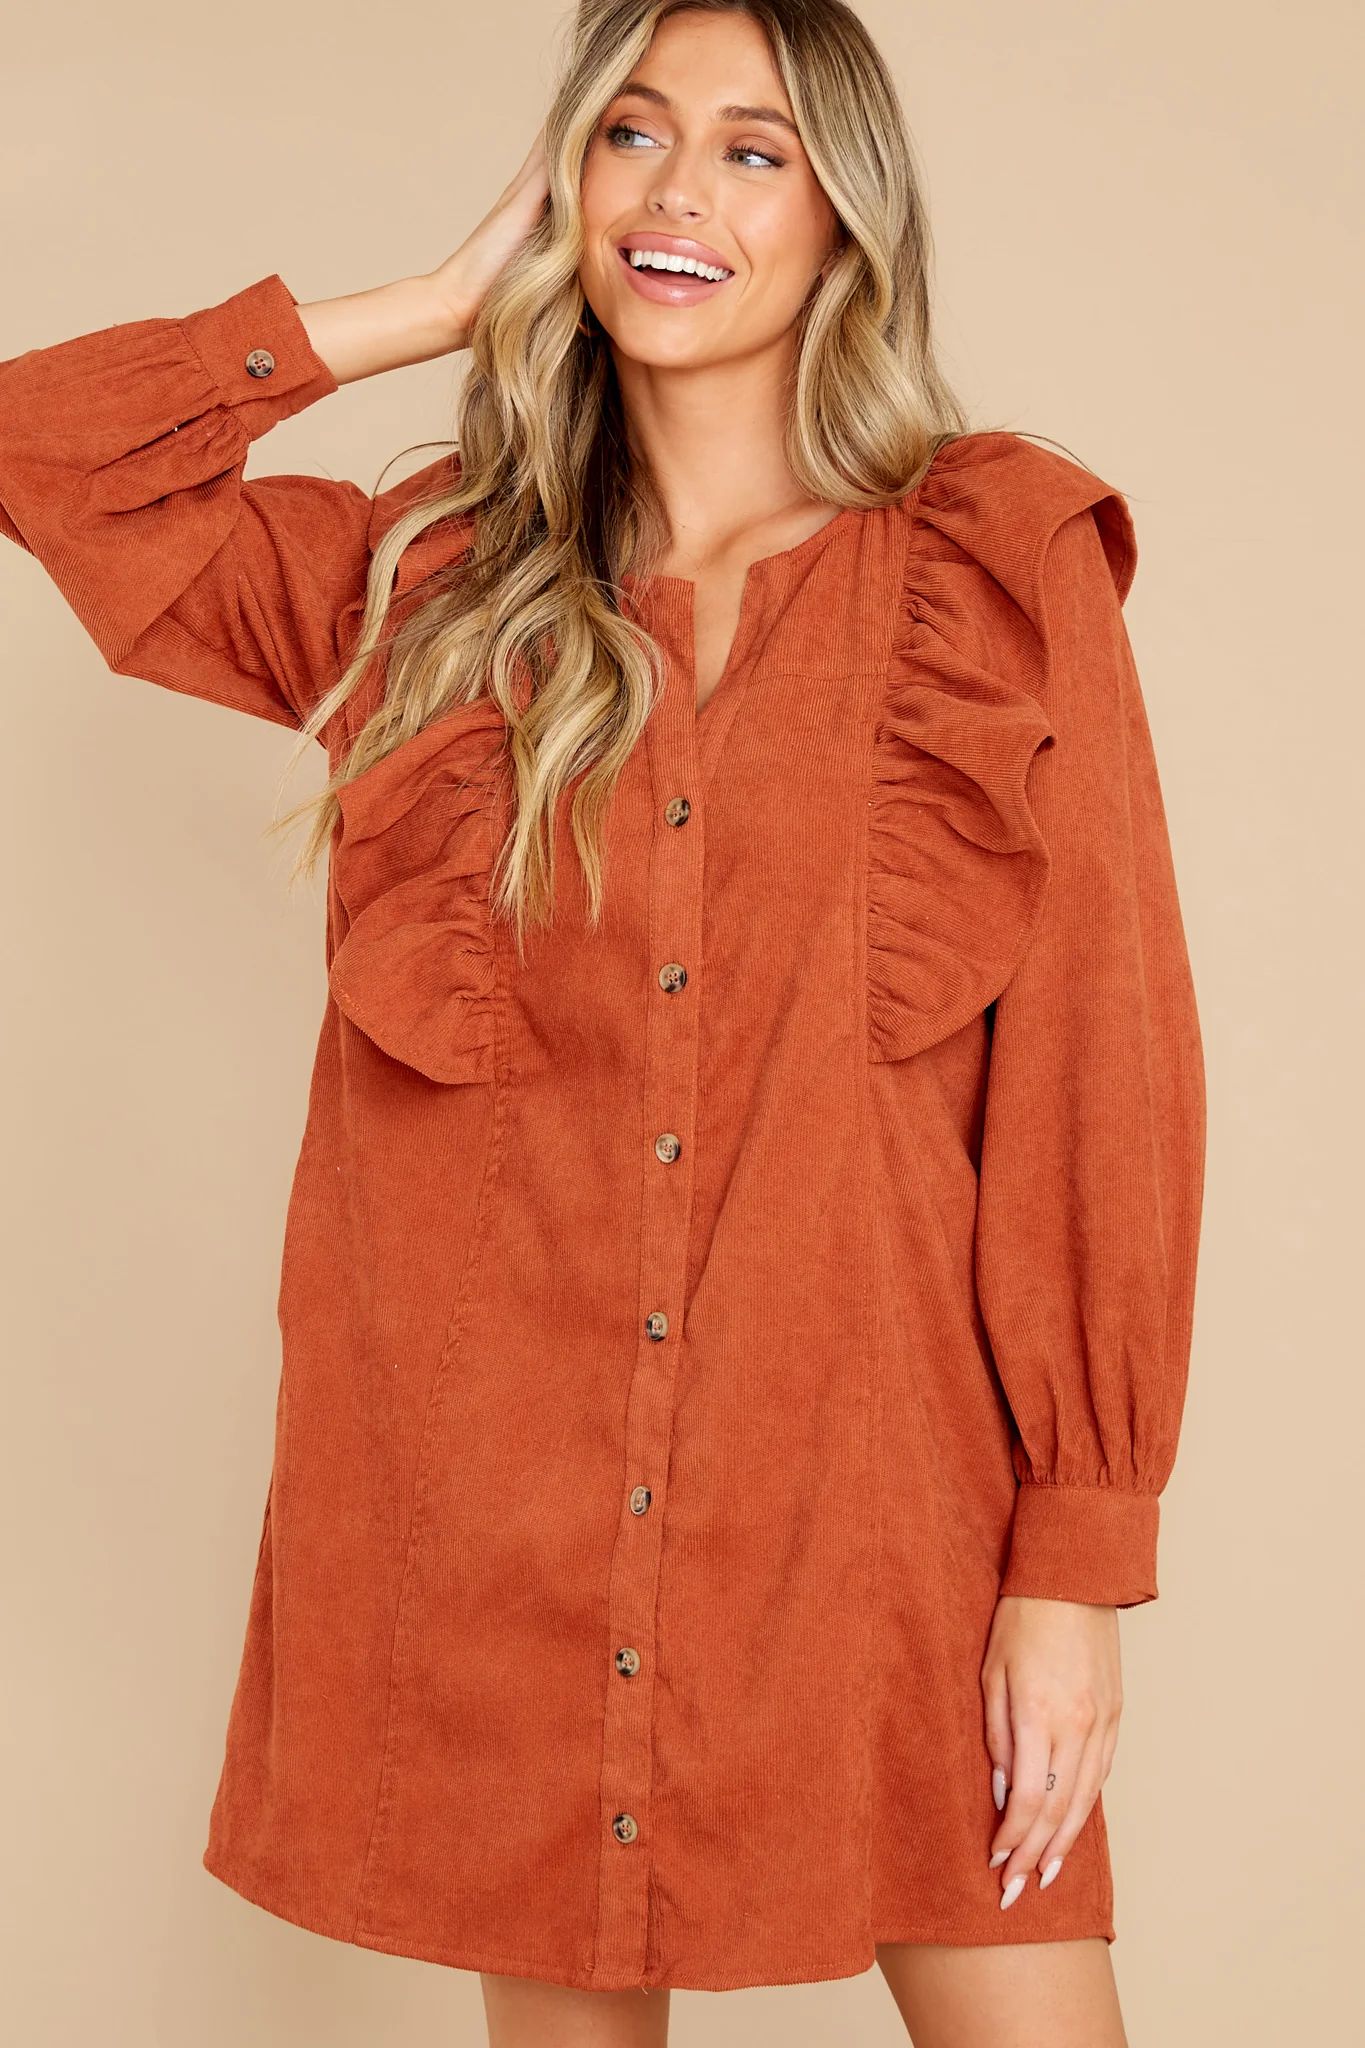 Never Doubted It Cinnamon Dress | Red Dress 